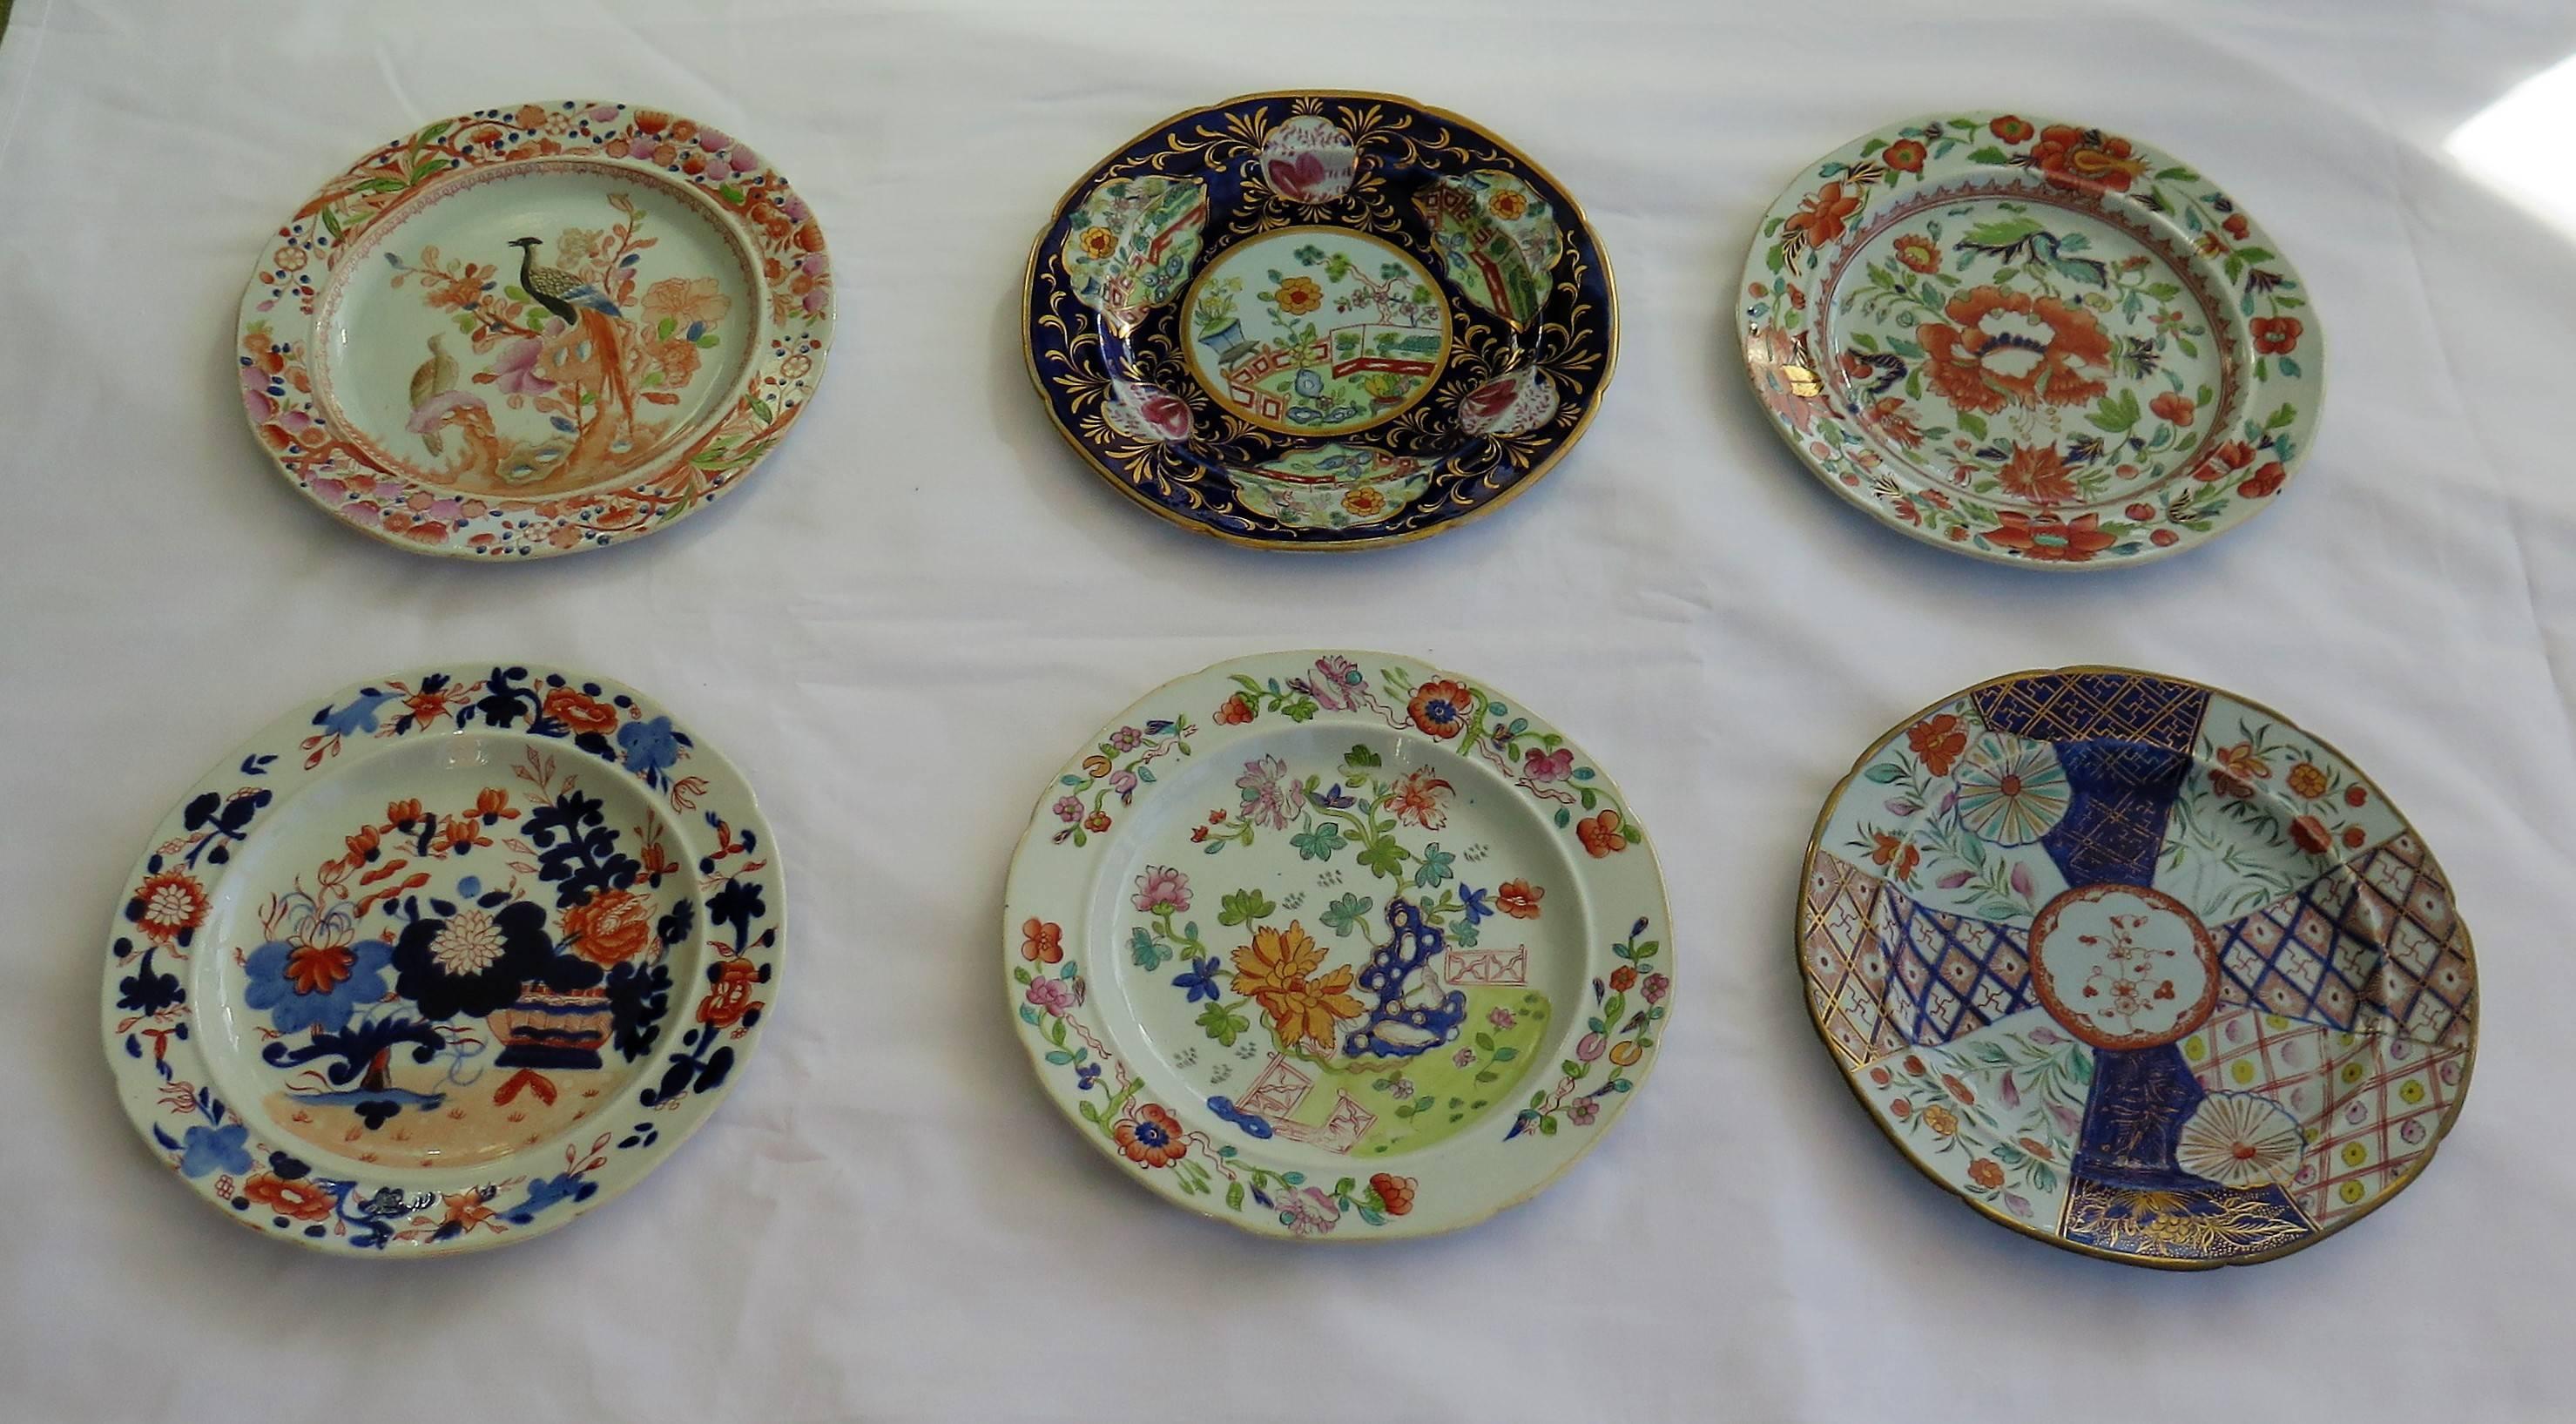 This is a harlequin set of six Mason's ironstone plates, all dating to the earliest period between 1813-1820. 

All the plates are the same nominal 8 inch size and shape, but have different chinoiserie patterns and base marks as follows; 

Top